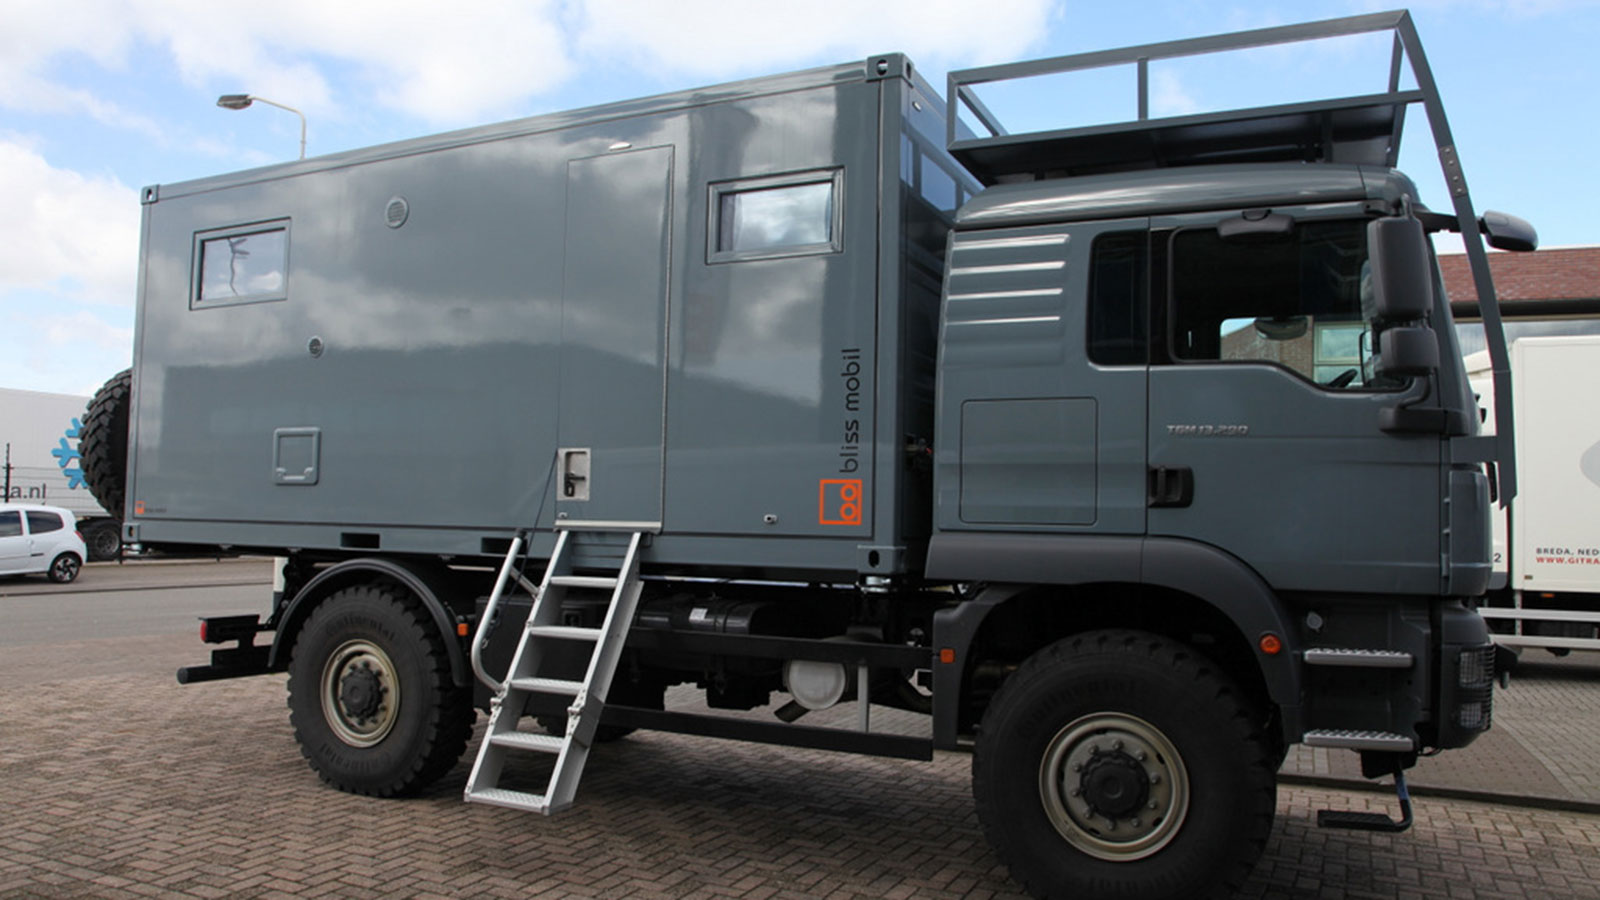 BLISS MOBILE EXPEDITION VEHICLE